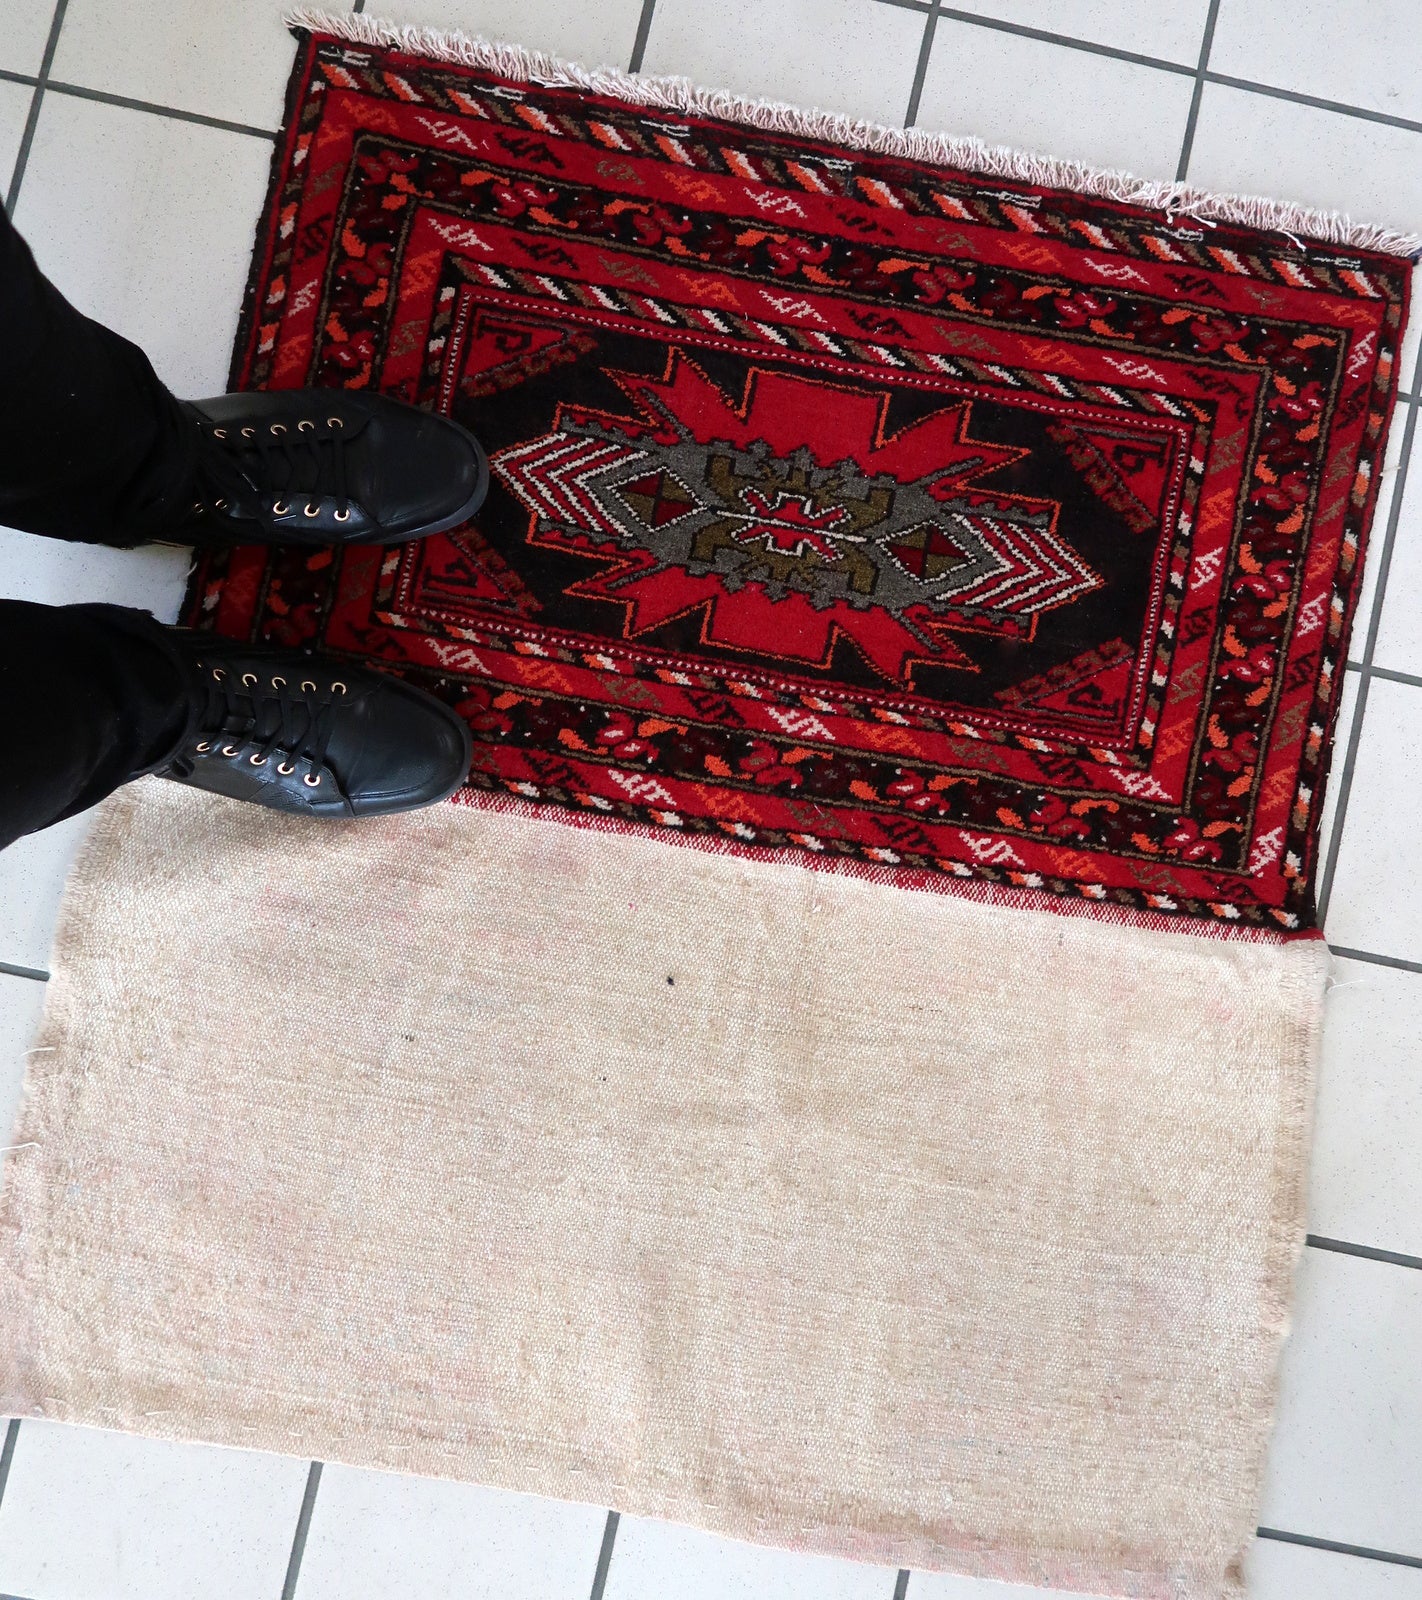 Handmade vintage Middle Eastern salt bag in bright colors. The rug is from the end of 20th century in original good condition. The size including kilim is 1.6' x 2.5' (50cm x 80cm). The bag is opened up, we can stitch it back by request.